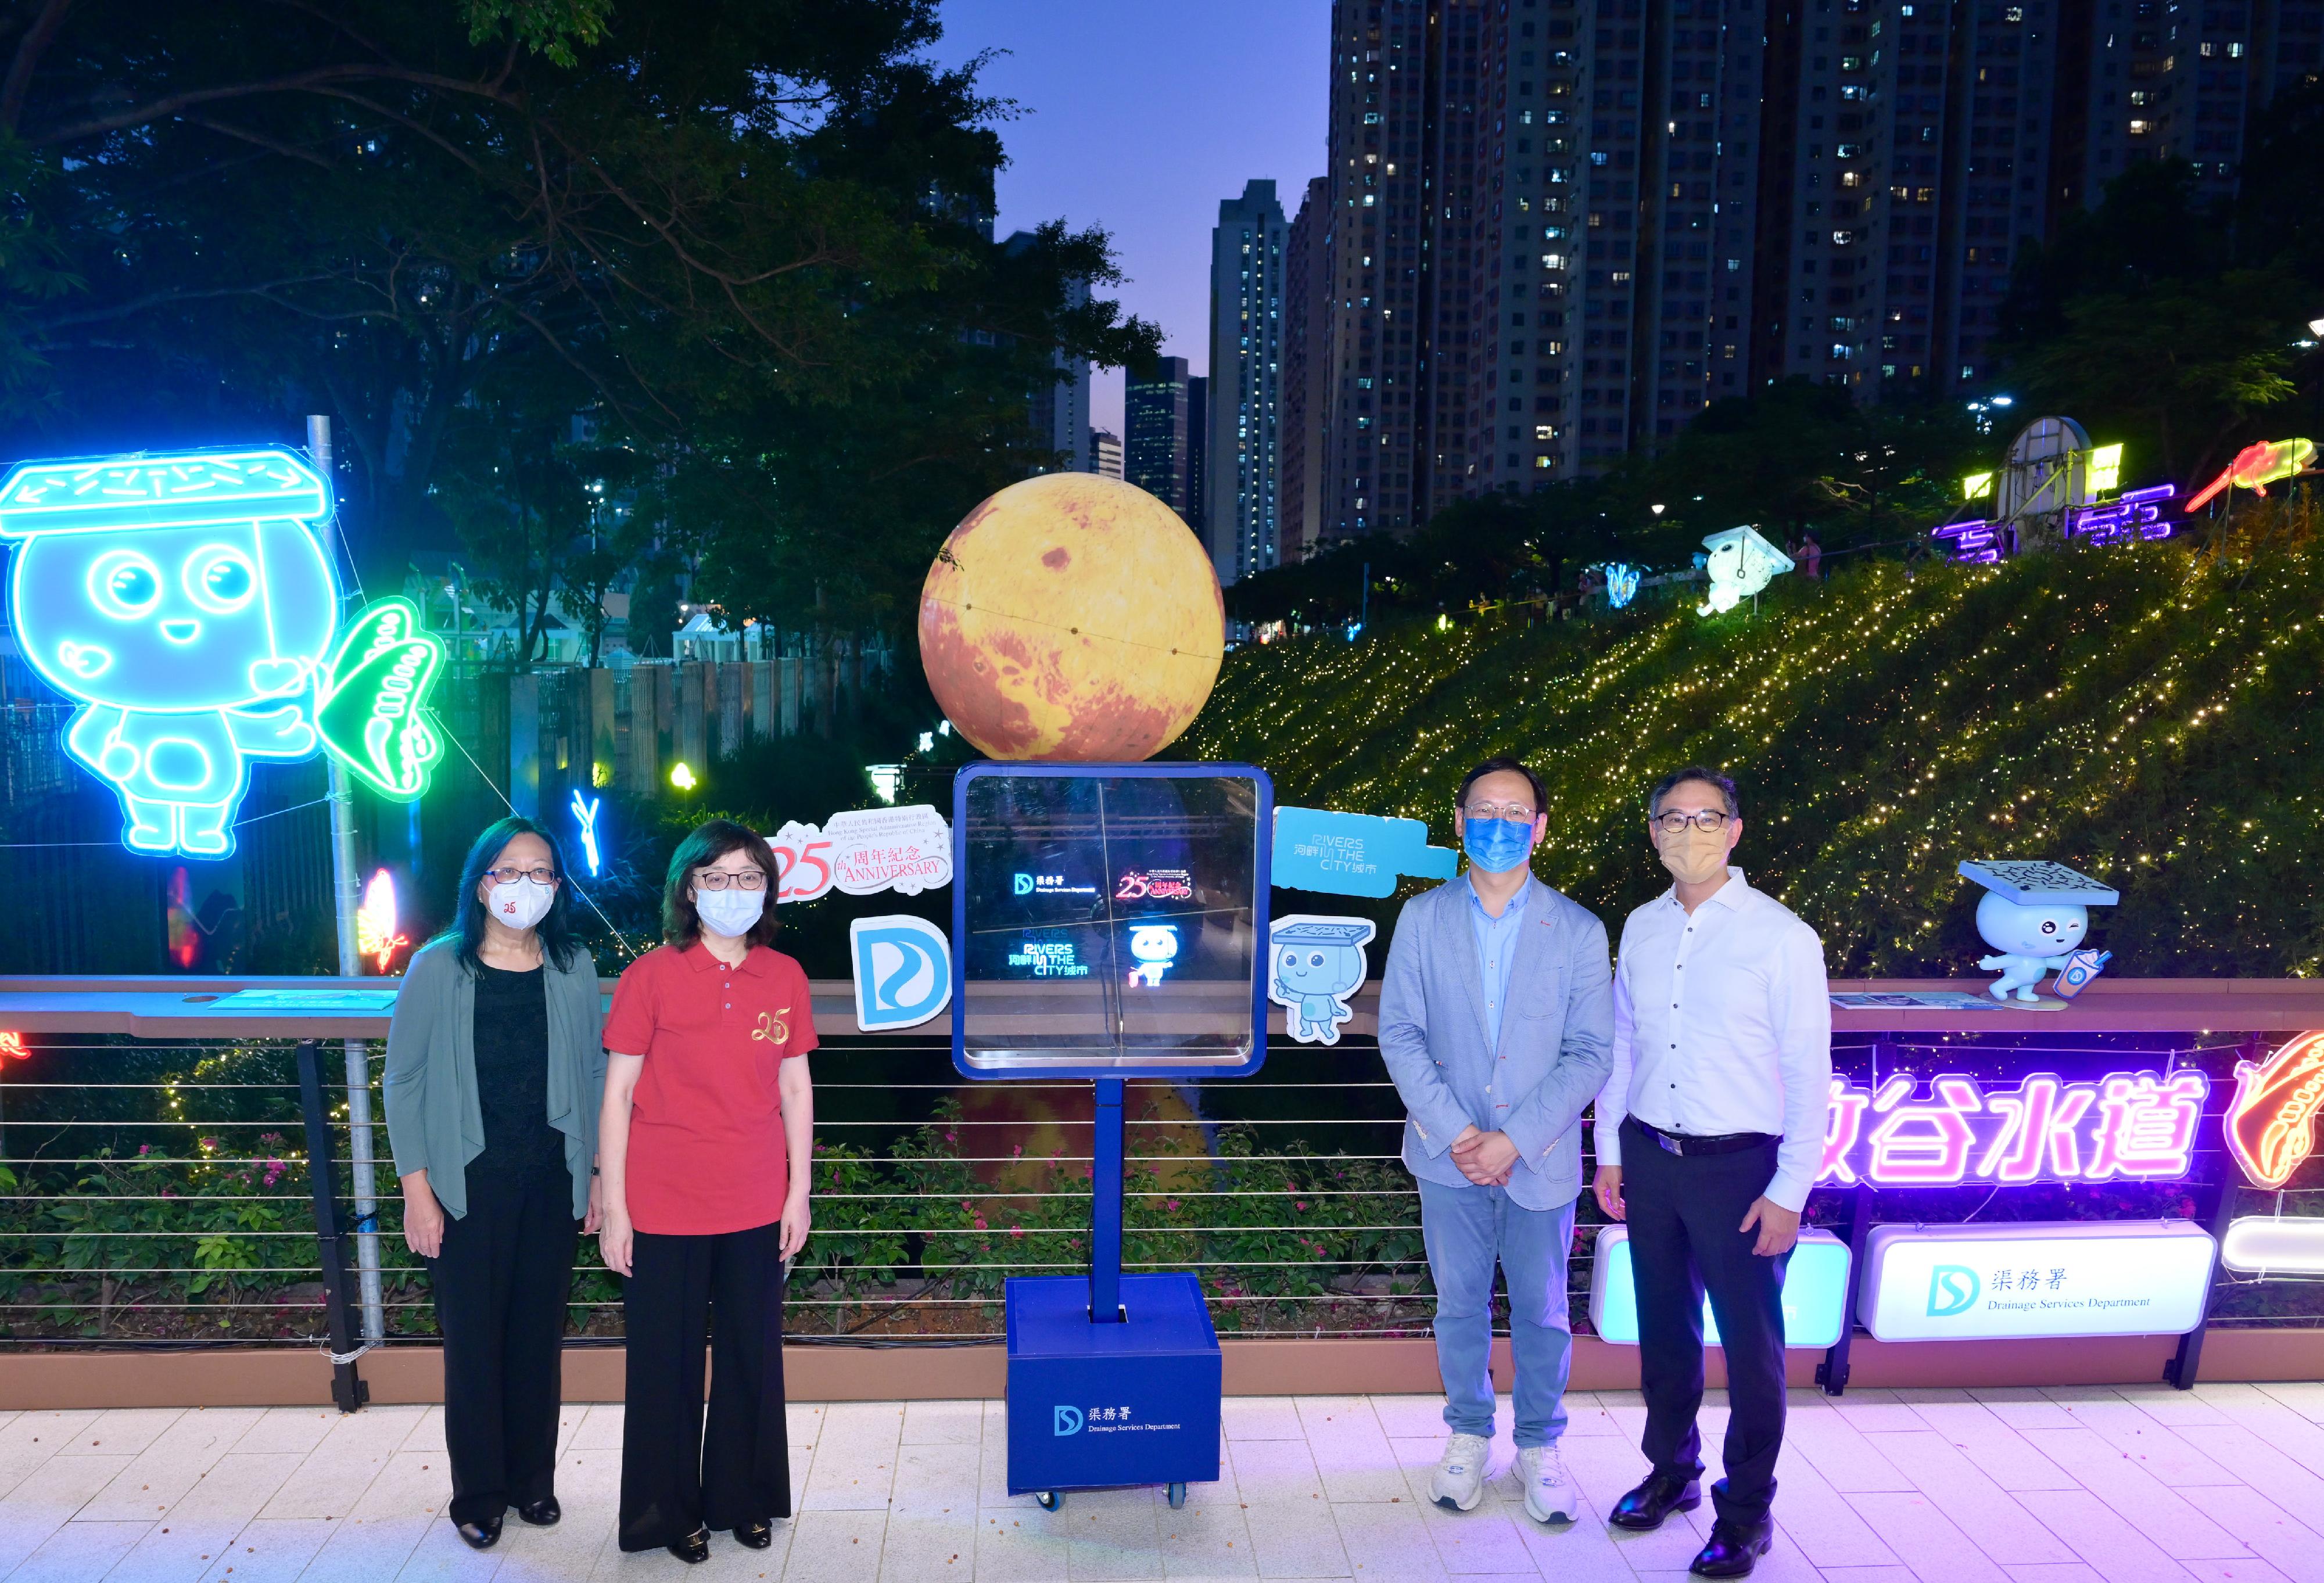 The Drainage Services Department is holding a Mid-Autumn Lighting Festival at Jordan Valley Channel and Kai Tak River from today (September 5) to September 18. Photo shows (from left) the Director of Drainage Services, Ms Alice Pang; the Secretary for Development, Ms Bernadette Linn; the Chairman of Kwun Tong District Council, Mr Wilson Or; and the Permanent Secretary for Development (Works), Mr Ricky Lau, officiating at the lighting ceremony.